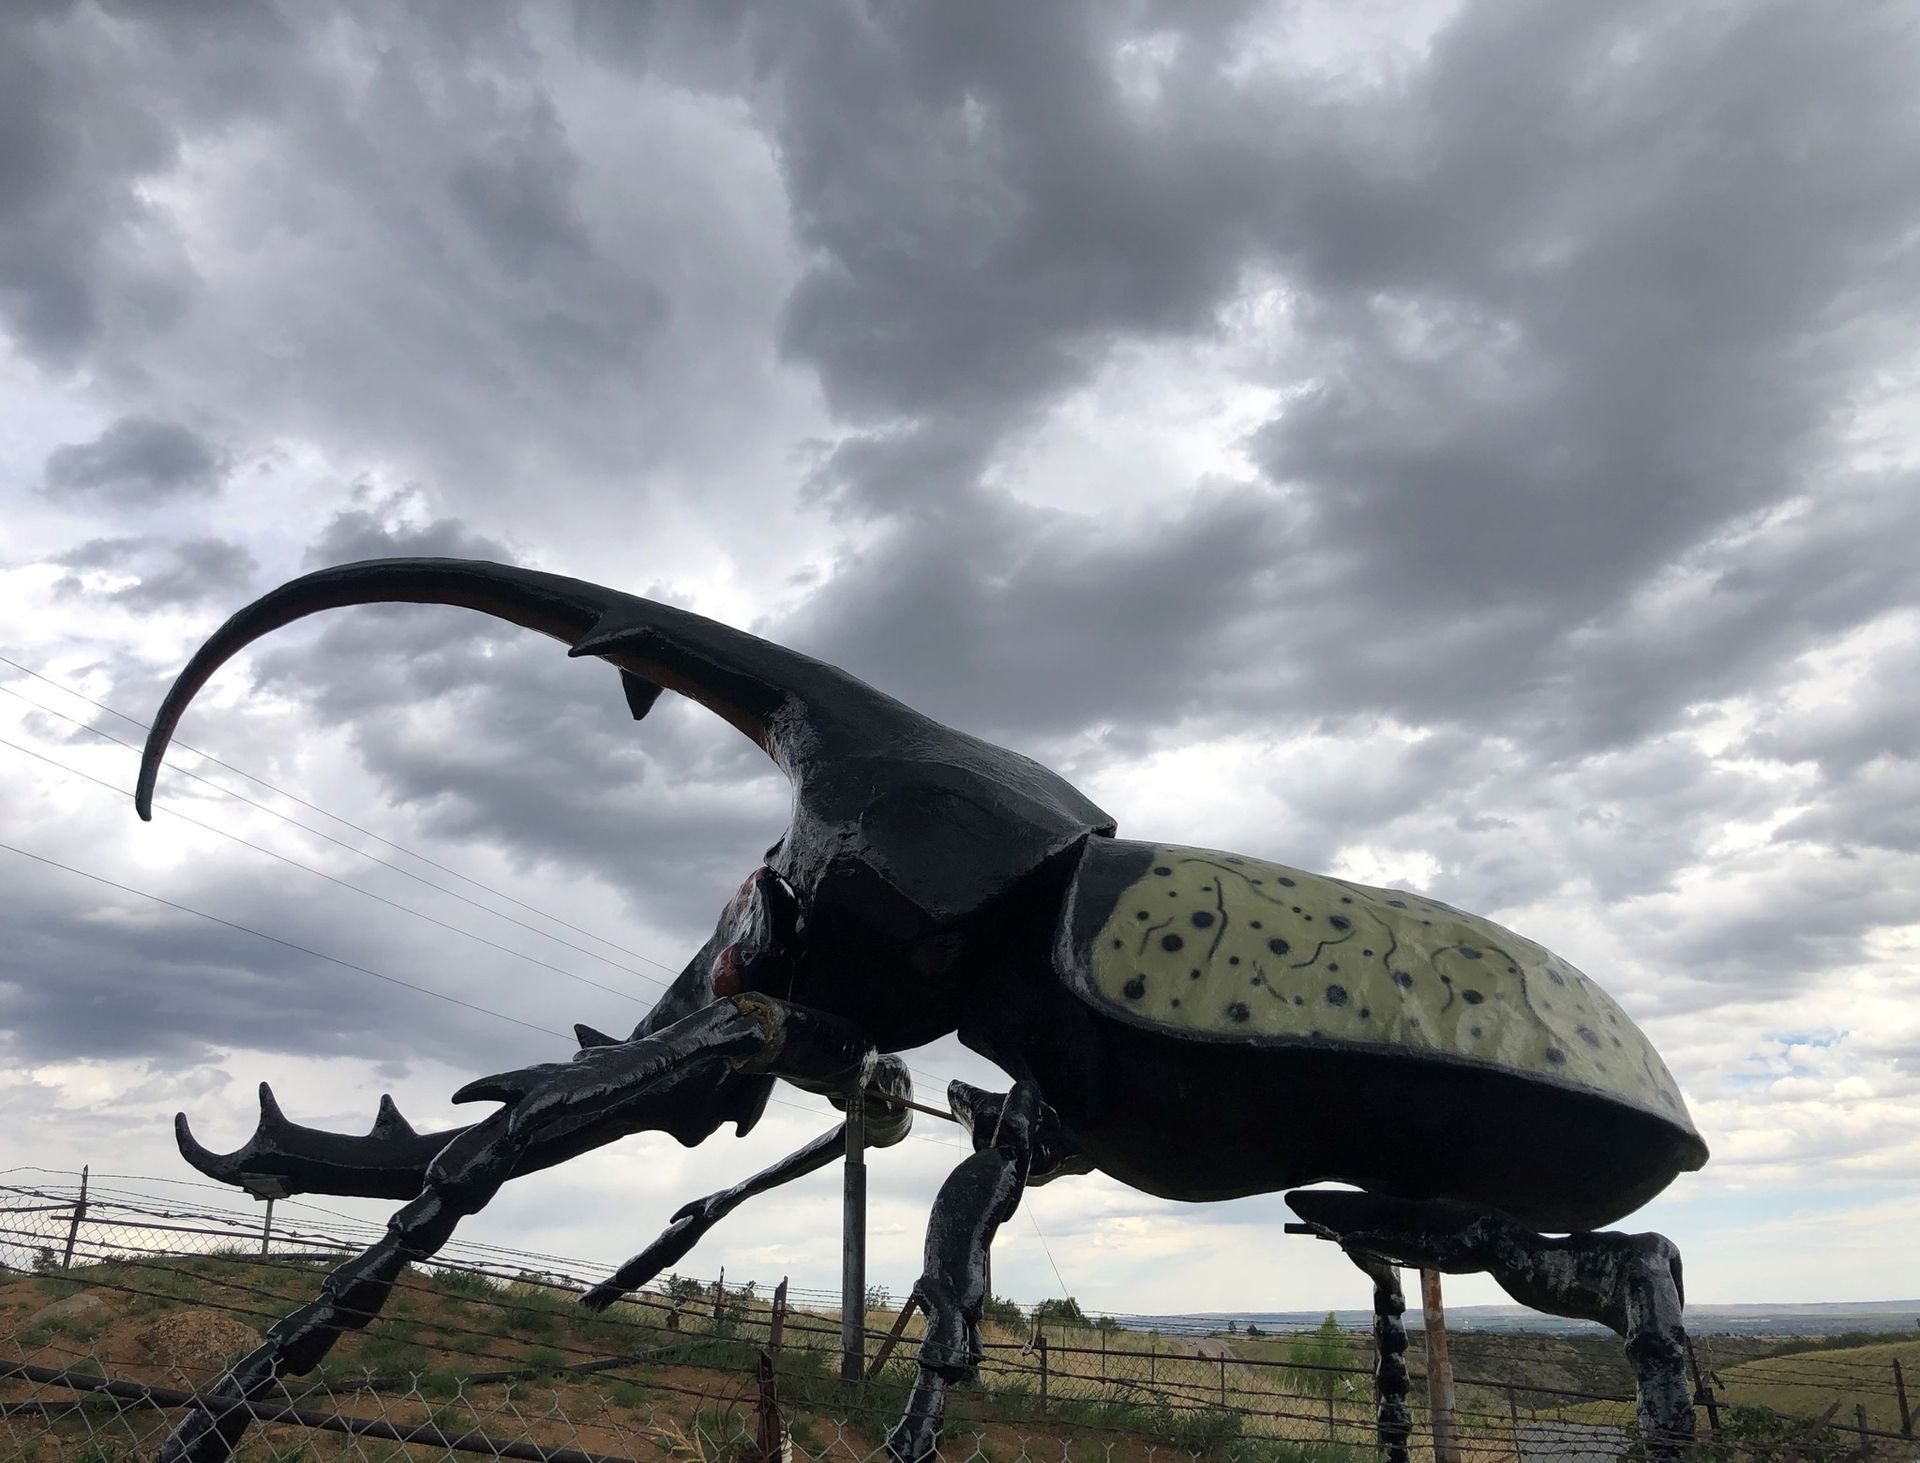 World’s Largest Beetle Statue: world record in Colorado Springs, Colorado